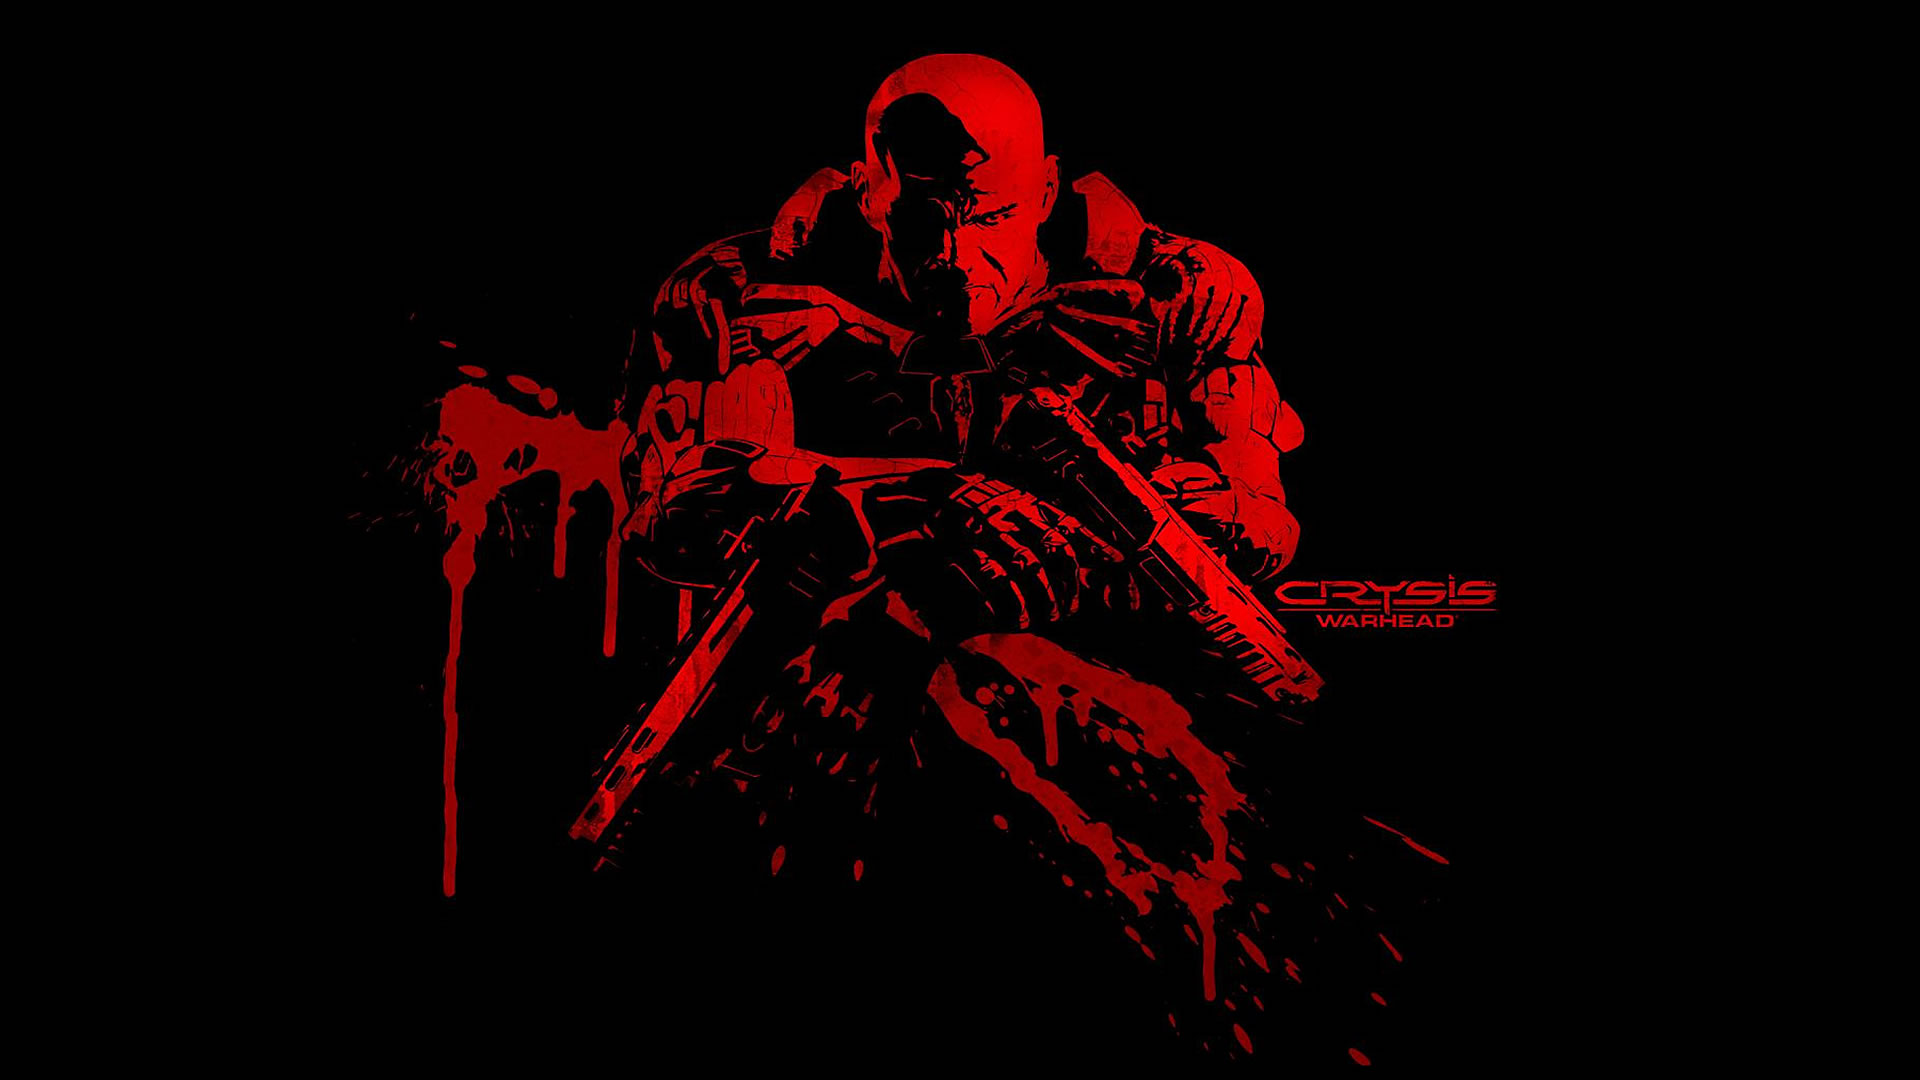 Psycho In Blood Red Action Games Wallpaper Image Featuring Crysis